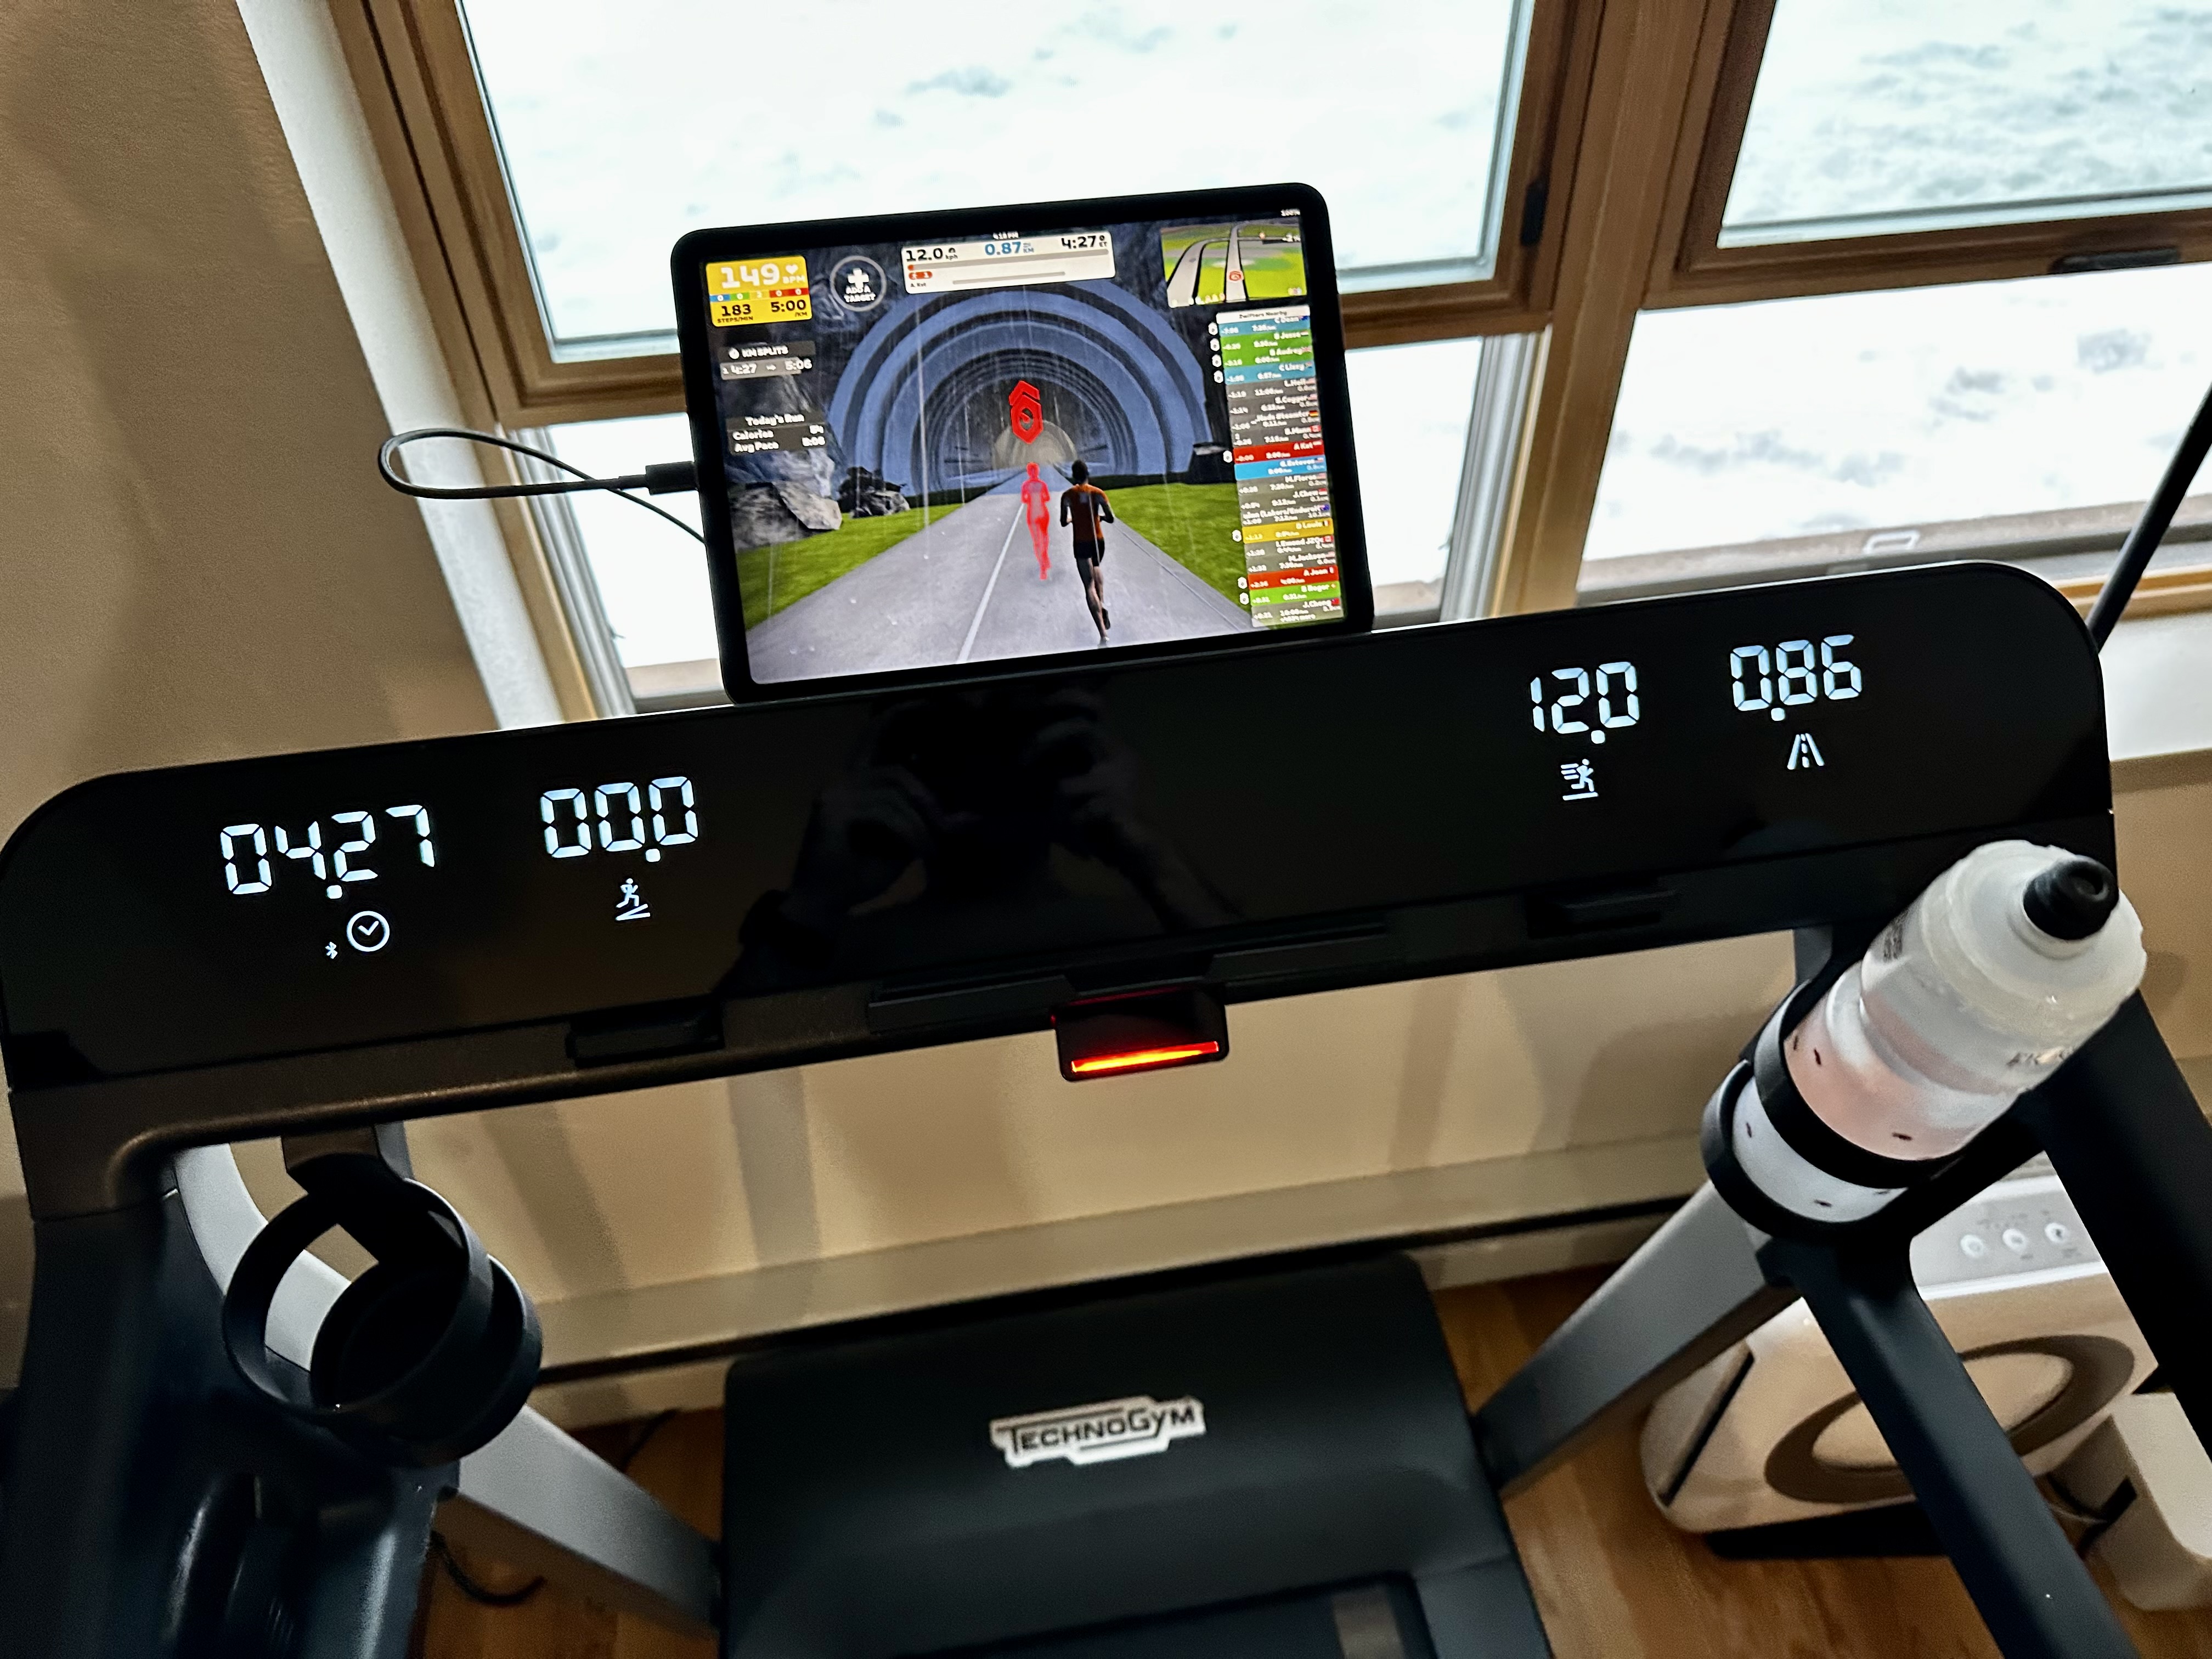 The console of a Technogym MyRun treadmill, from the point of view of someone running on it. The display shows 4:27 minutes elapsed, 0% incline, 12.0 km/h, and 0.86 km. On top of the console, a connected iPad is running Zwift. A water bottle is on the right bottle holder. The treadmill is in front of the windows; a heavy cover of snow can be seen on the ground outside.